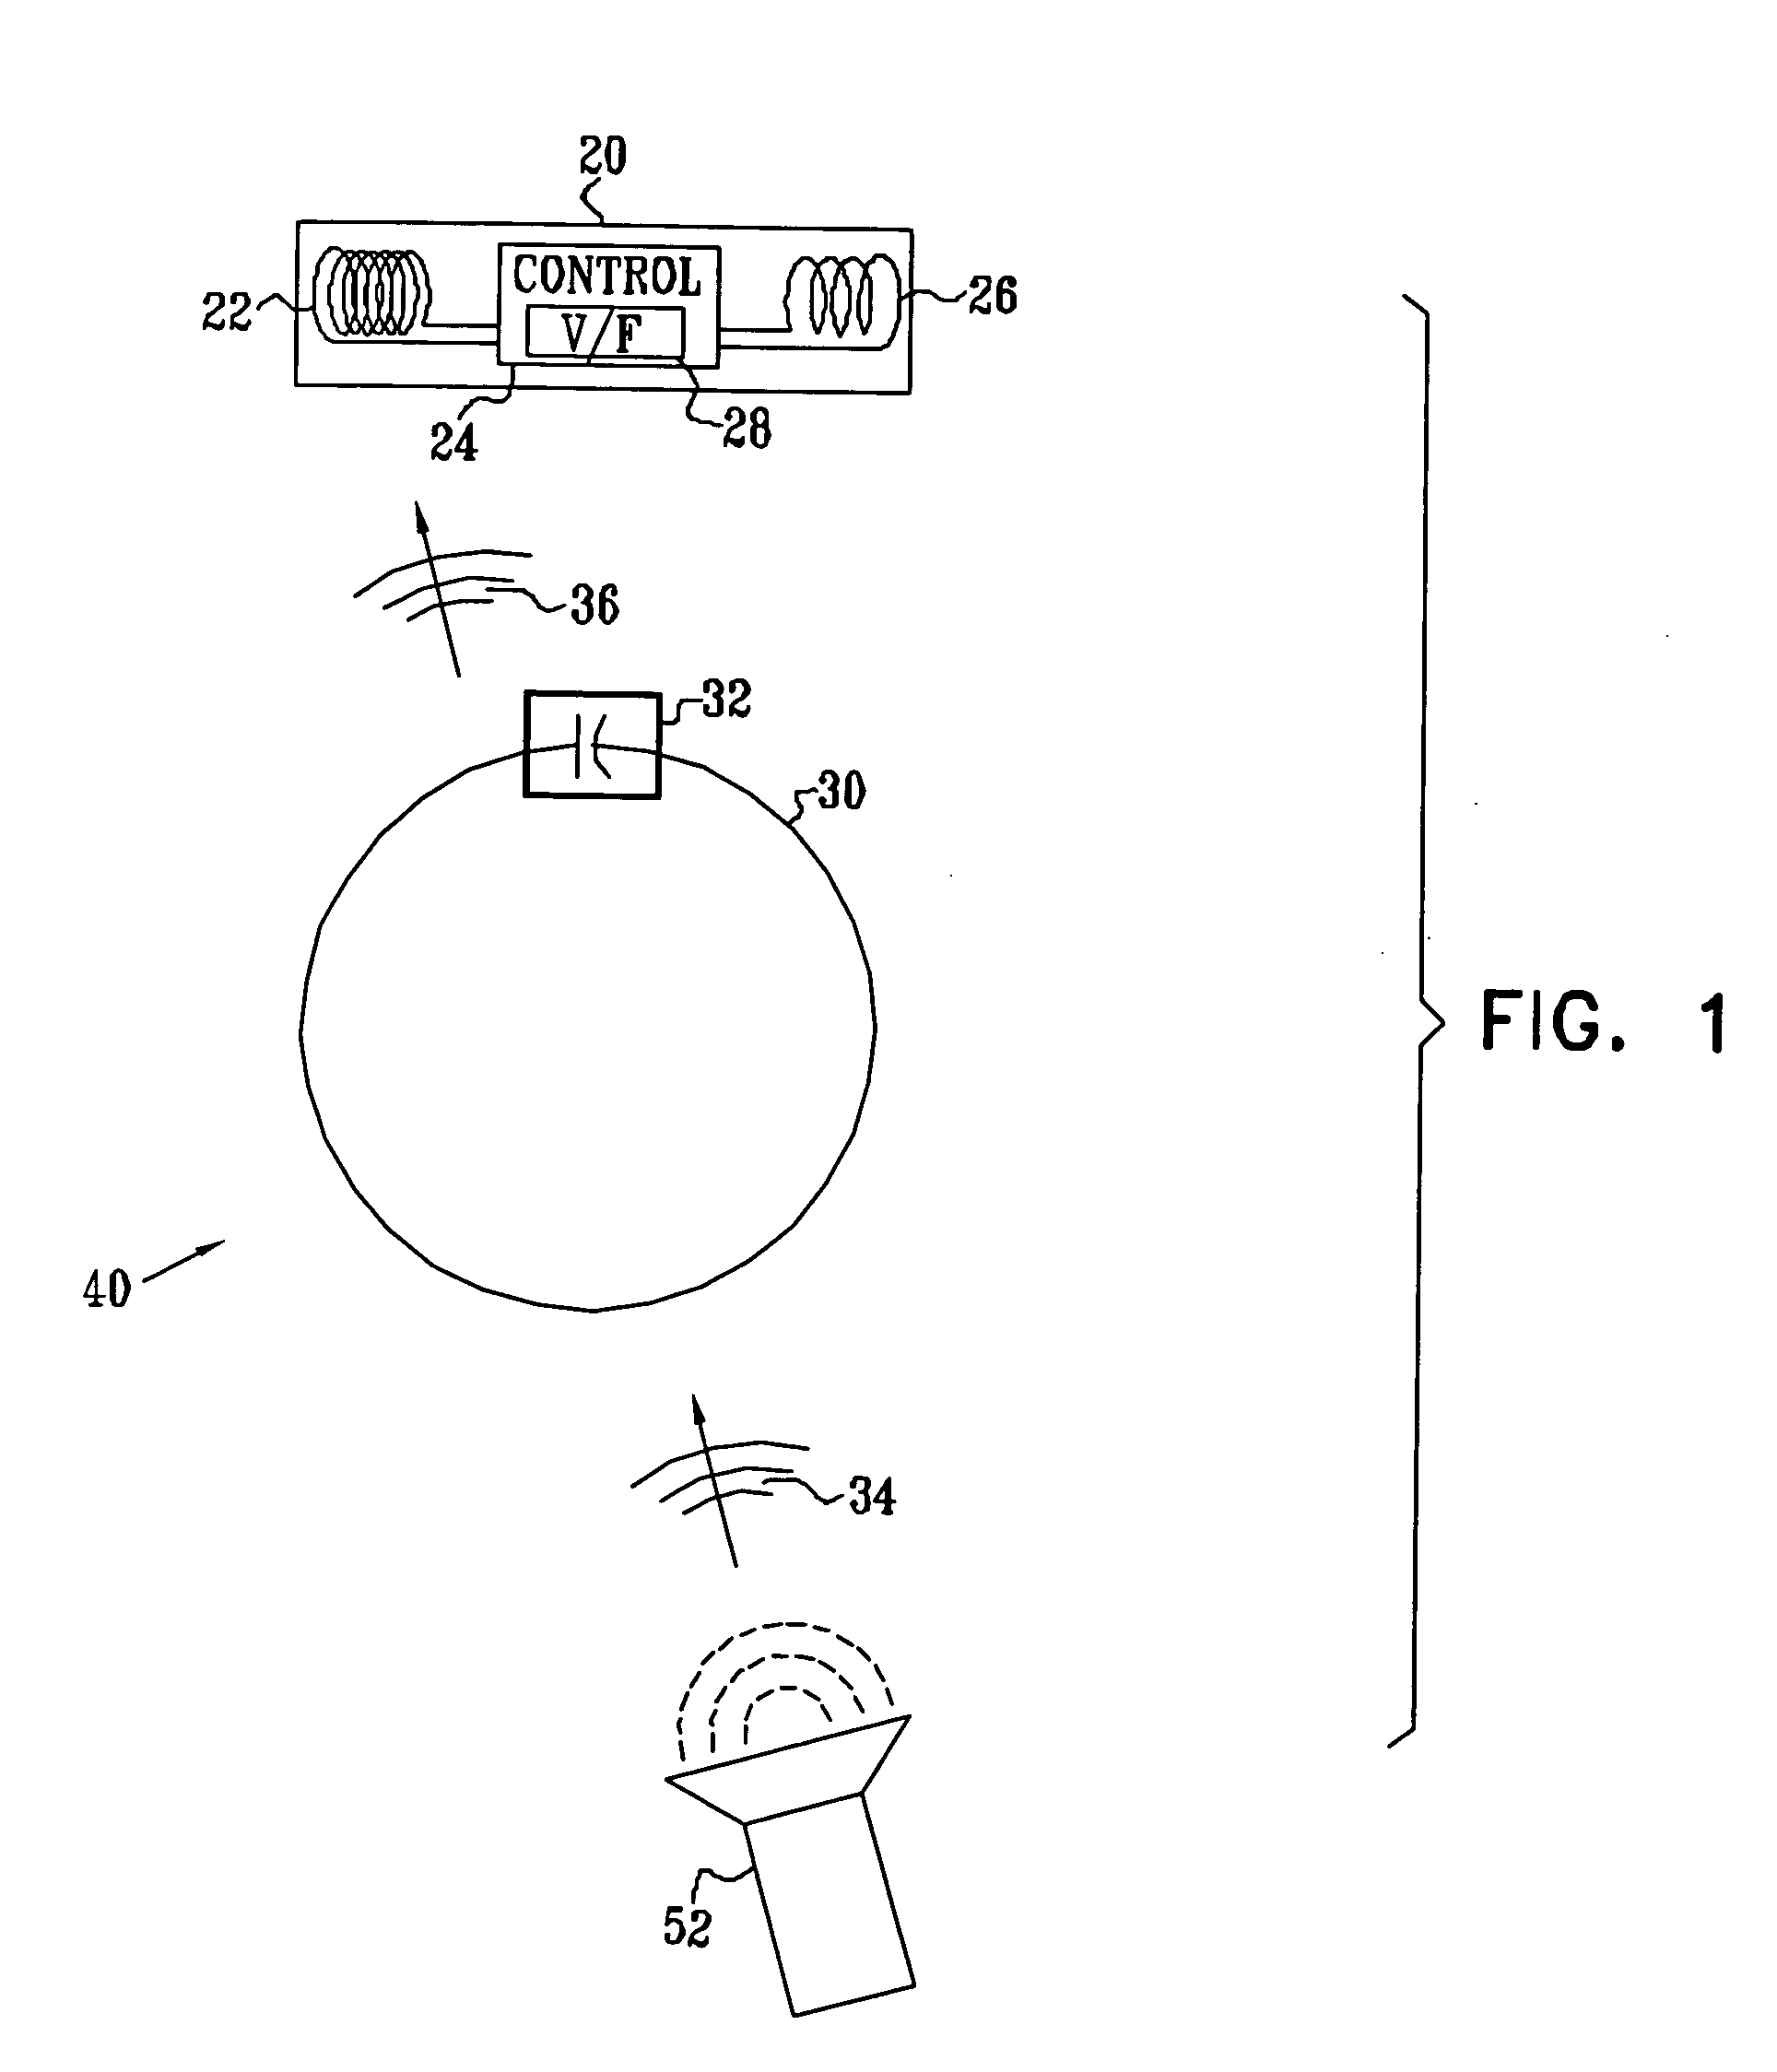 Energy transfer amplification for intrabody devices